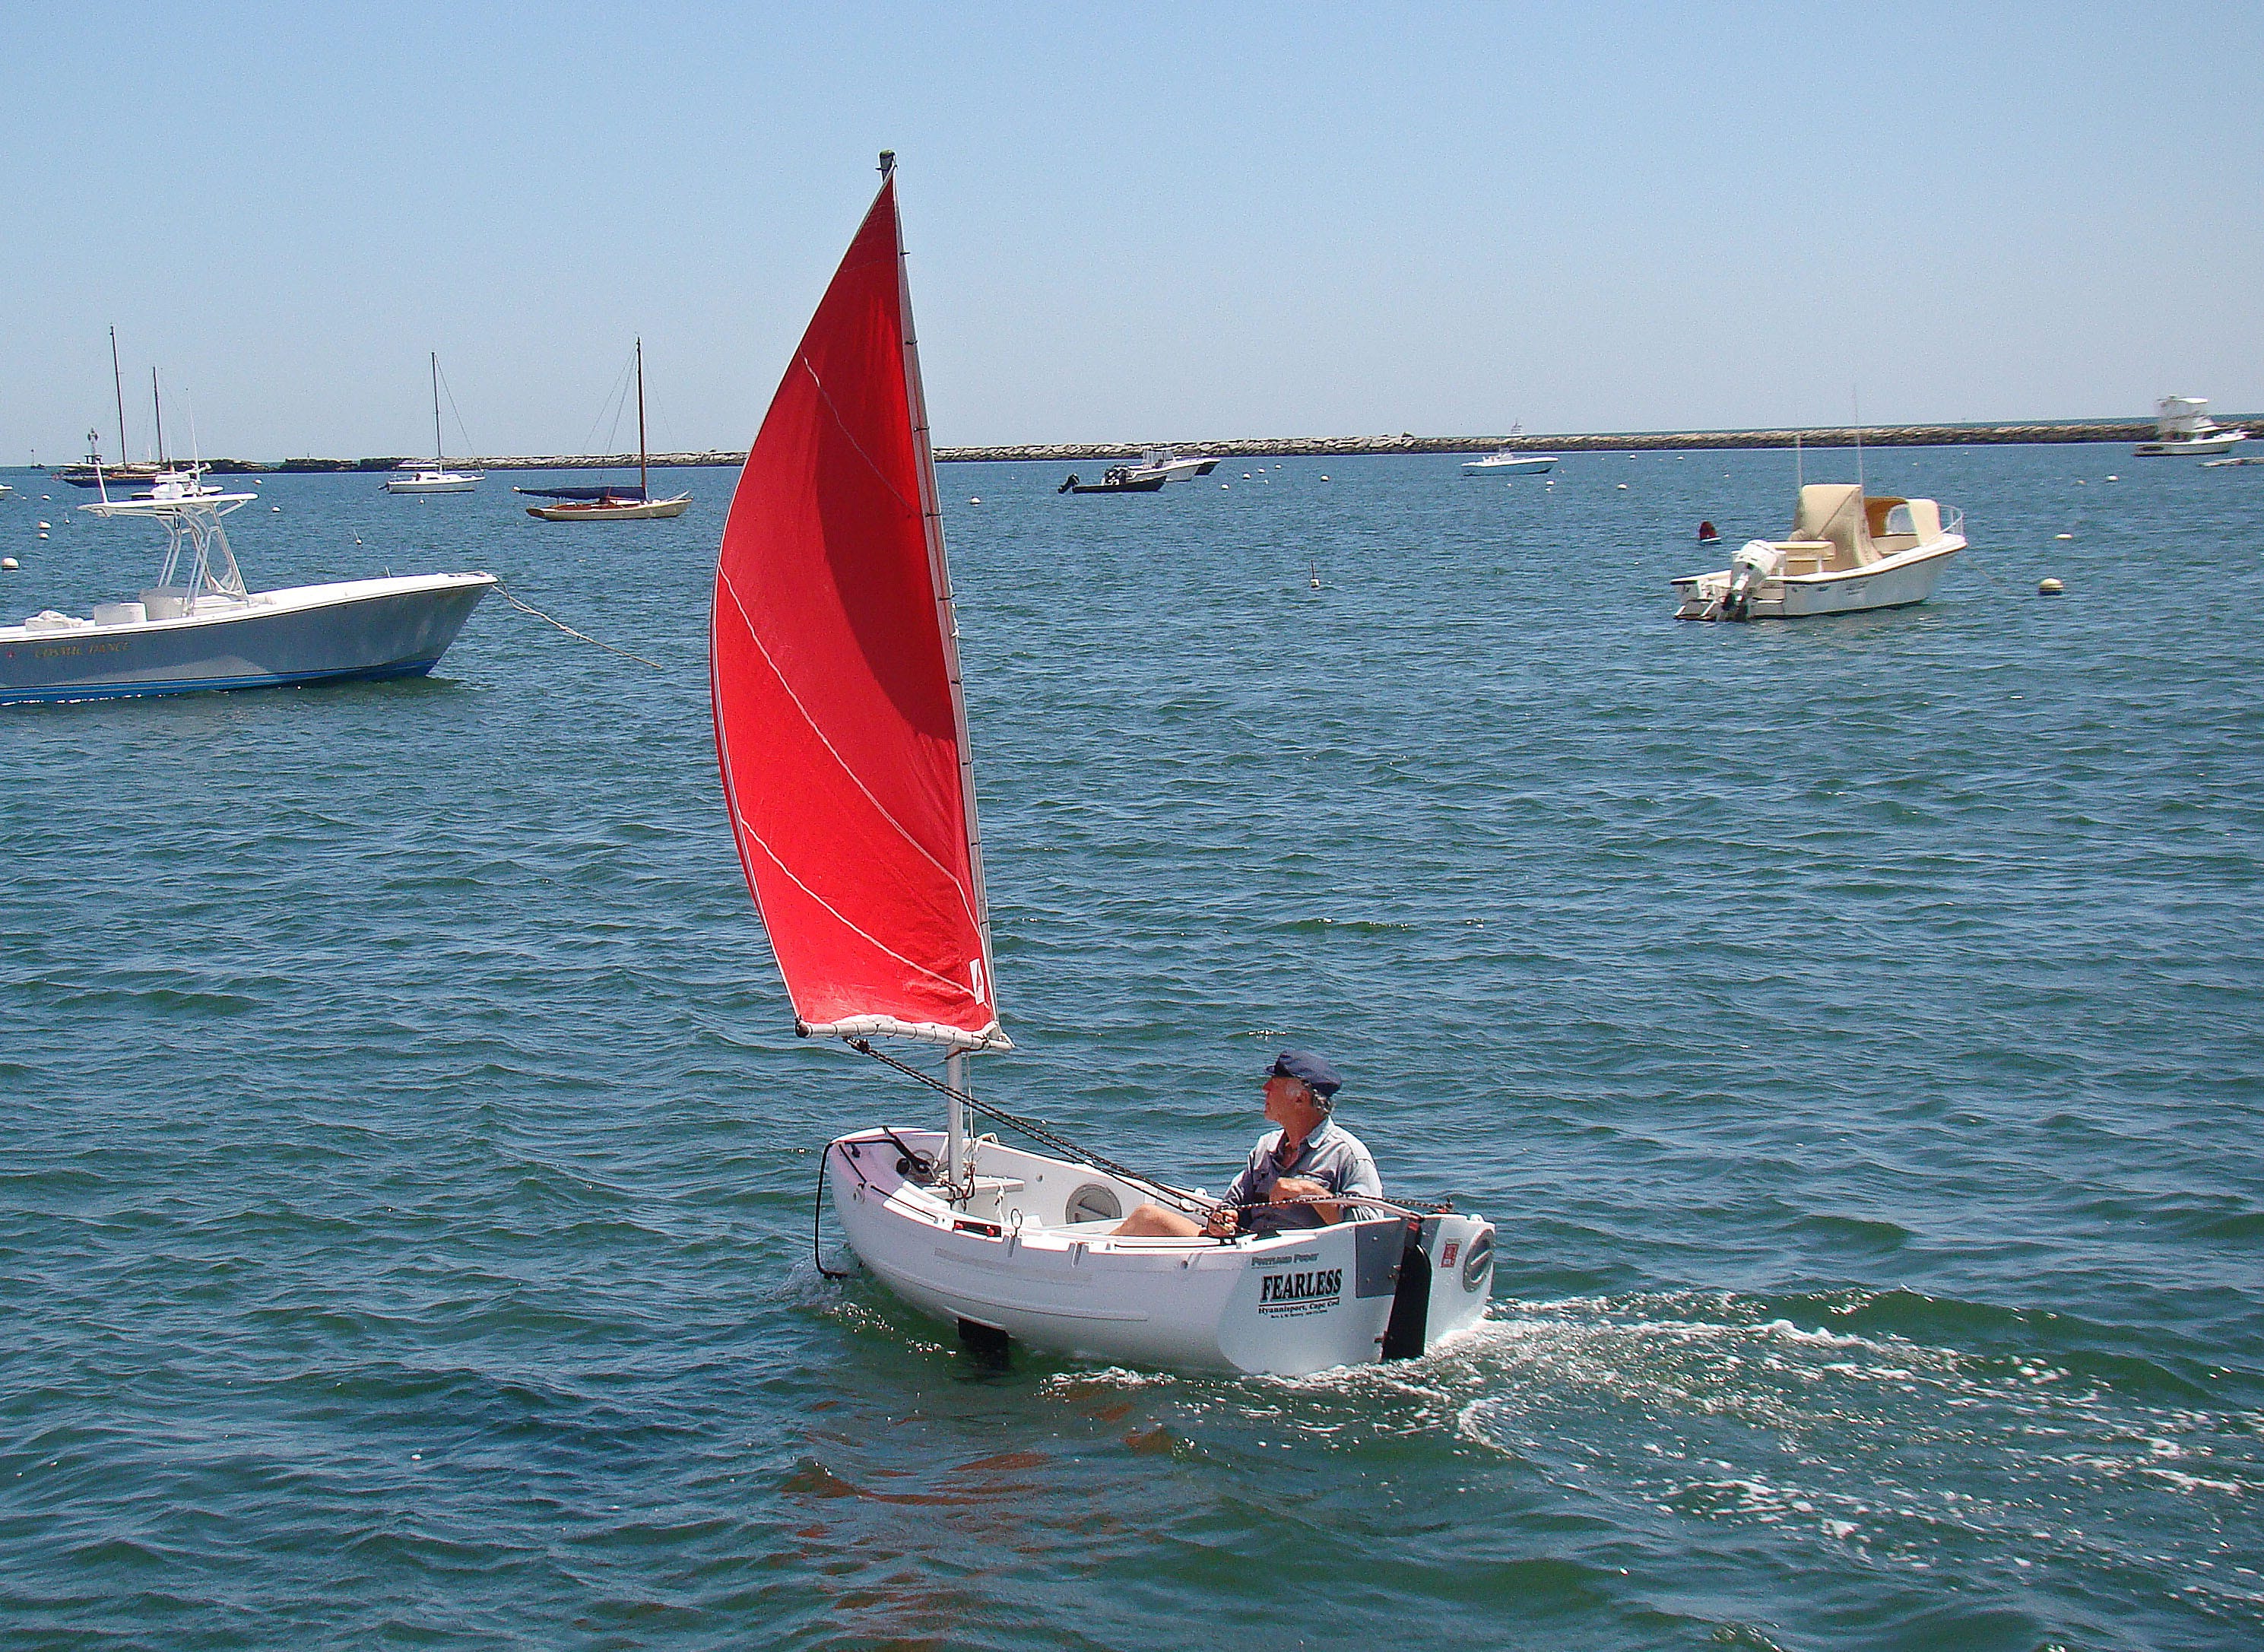 Boat Review: The Portland Pudgy - Small Craft Advisor